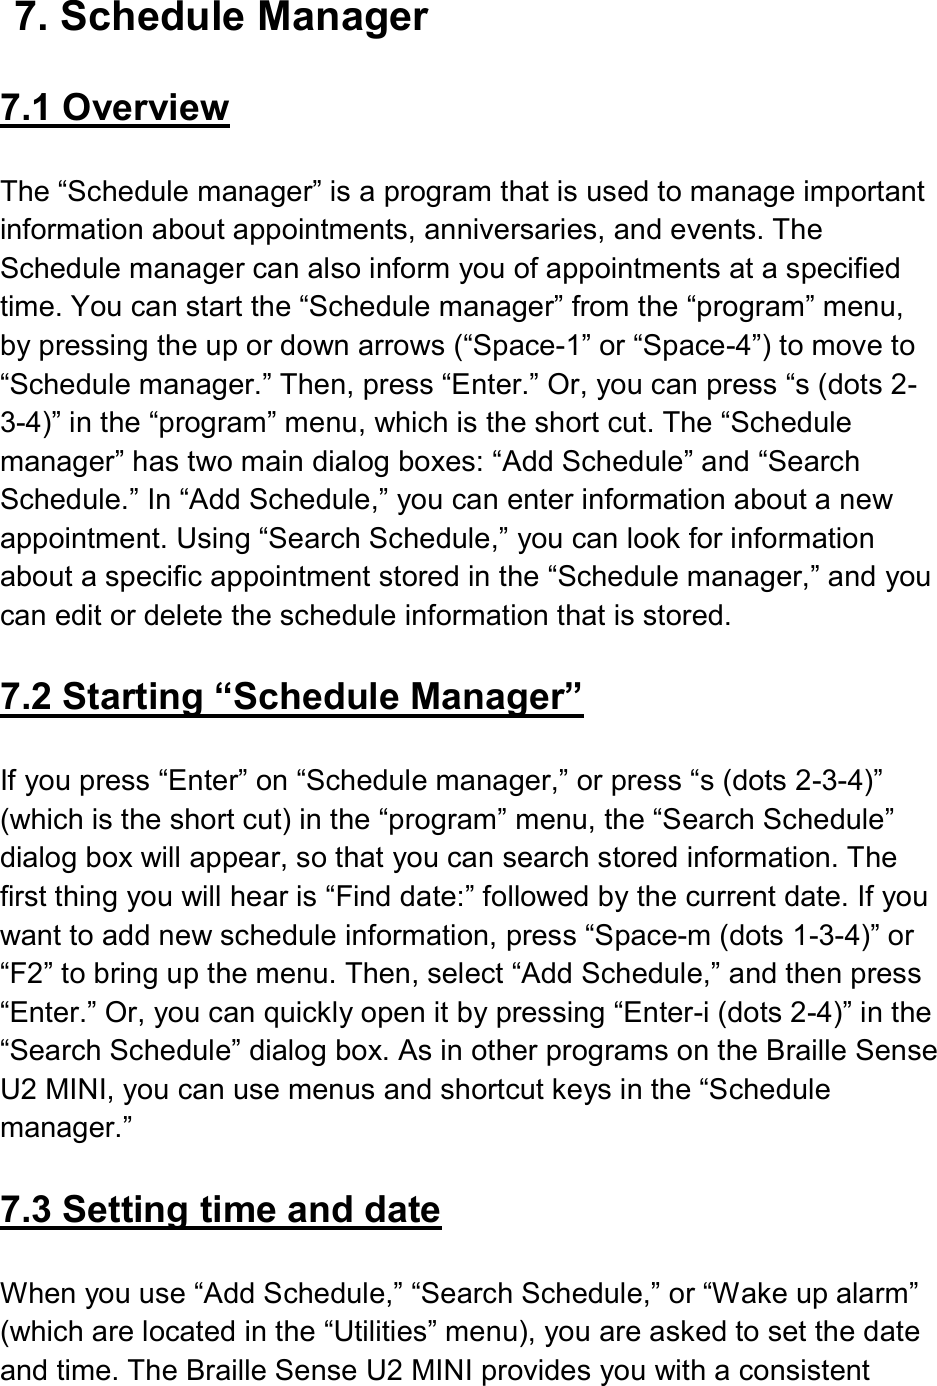  7. Schedule Manager  7.1 Overview  The “Schedule manager” is a program that is used to manage important information about appointments, anniversaries, and events. The Schedule manager can also inform you of appointments at a specified time. You can start the “Schedule manager” from the “program” menu, by pressing the up or down arrows (“Space-1” or “Space-4”) to move to “Schedule manager.” Then, press “Enter.” Or, you can press “s (dots 2-3-4)” in the “program” menu, which is the short cut. The “Schedule manager” has two main dialog boxes: “Add Schedule” and “Search Schedule.” In “Add Schedule,” you can enter information about a new appointment. Using “Search Schedule,” you can look for information about a specific appointment stored in the “Schedule manager,” and you can edit or delete the schedule information that is stored.  7.2 Starting “Schedule Manager”  If you press “Enter” on “Schedule manager,” or press “s (dots 2-3-4)” (which is the short cut) in the “program” menu, the “Search Schedule” dialog box will appear, so that you can search stored information. The first thing you will hear is “Find date:” followed by the current date. If you want to add new schedule information, press “Space-m (dots 1-3-4)” or “F2” to bring up the menu. Then, select “Add Schedule,” and then press “Enter.” Or, you can quickly open it by pressing “Enter-i (dots 2-4)” in the “Search Schedule” dialog box. As in other programs on the Braille Sense U2 MINI, you can use menus and shortcut keys in the “Schedule manager.”    7.3 Setting time and date  When you use “Add Schedule,” “Search Schedule,” or “Wake up alarm” (which are located in the “Utilities” menu), you are asked to set the date and time. The Braille Sense U2 MINI provides you with a consistent 